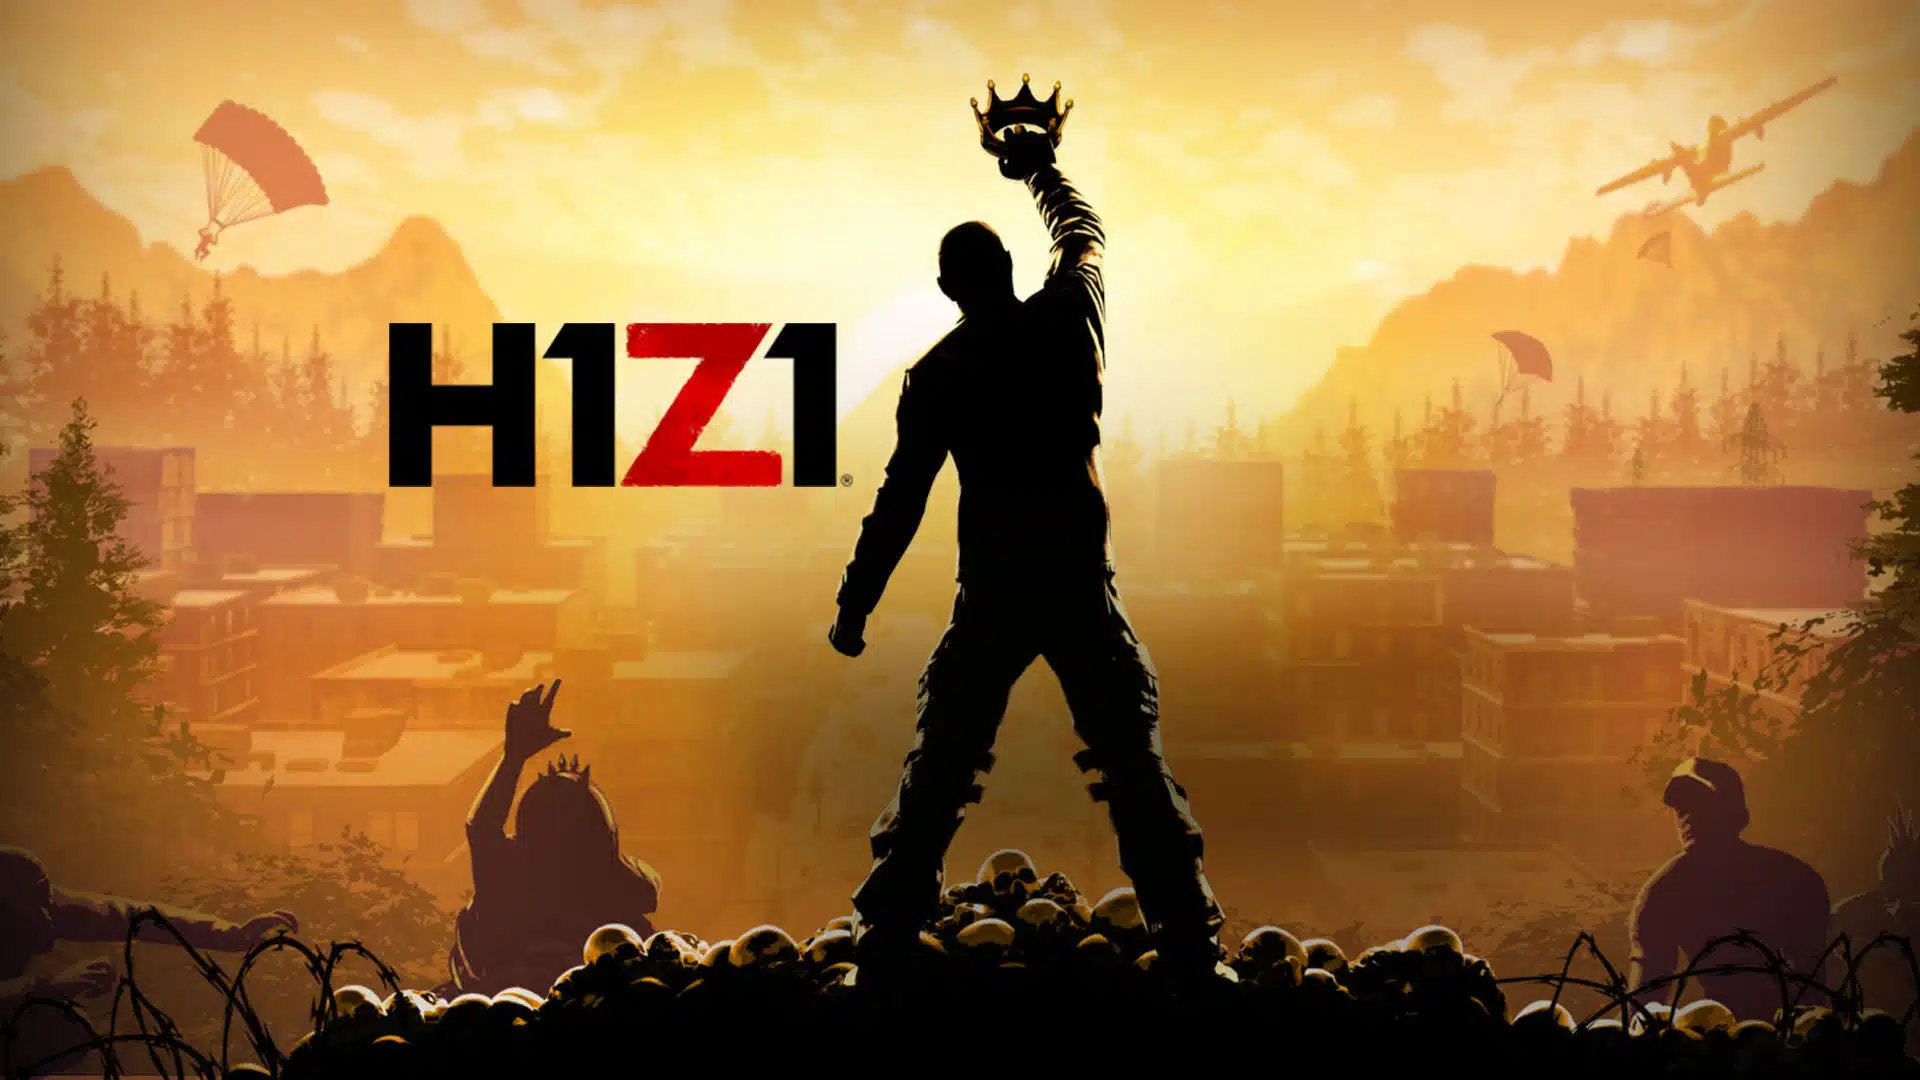 H1Z1: Why did it fail? From Popular Battle Royale To A Dead Game